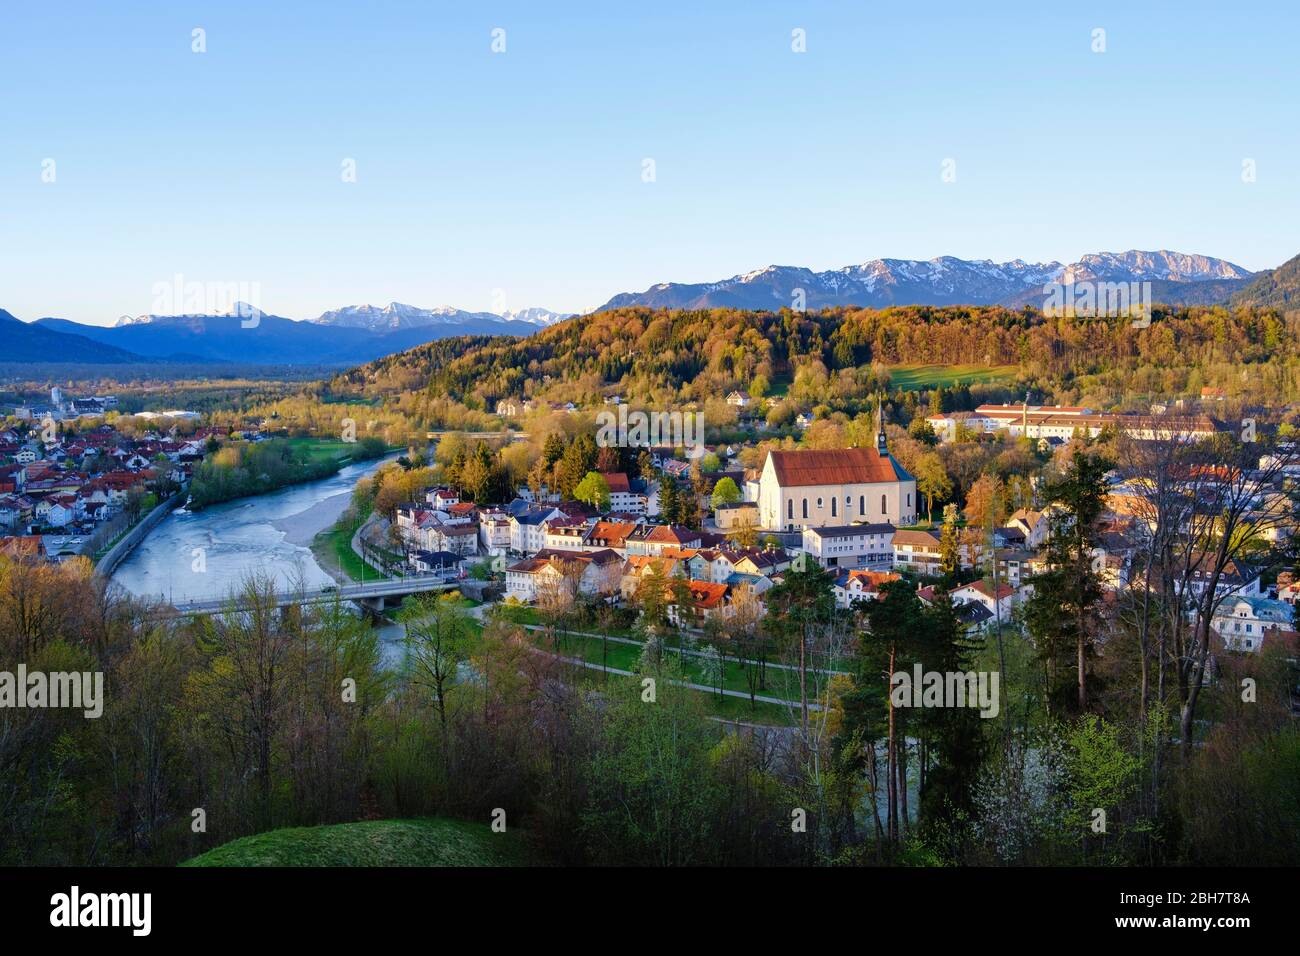 Isar and Franciscan Church, view from the Calvary, Bad Toelz, Isarwinkel, Alpine foothills, Upper Bavaria, Bavaria, Germany Stock Photo